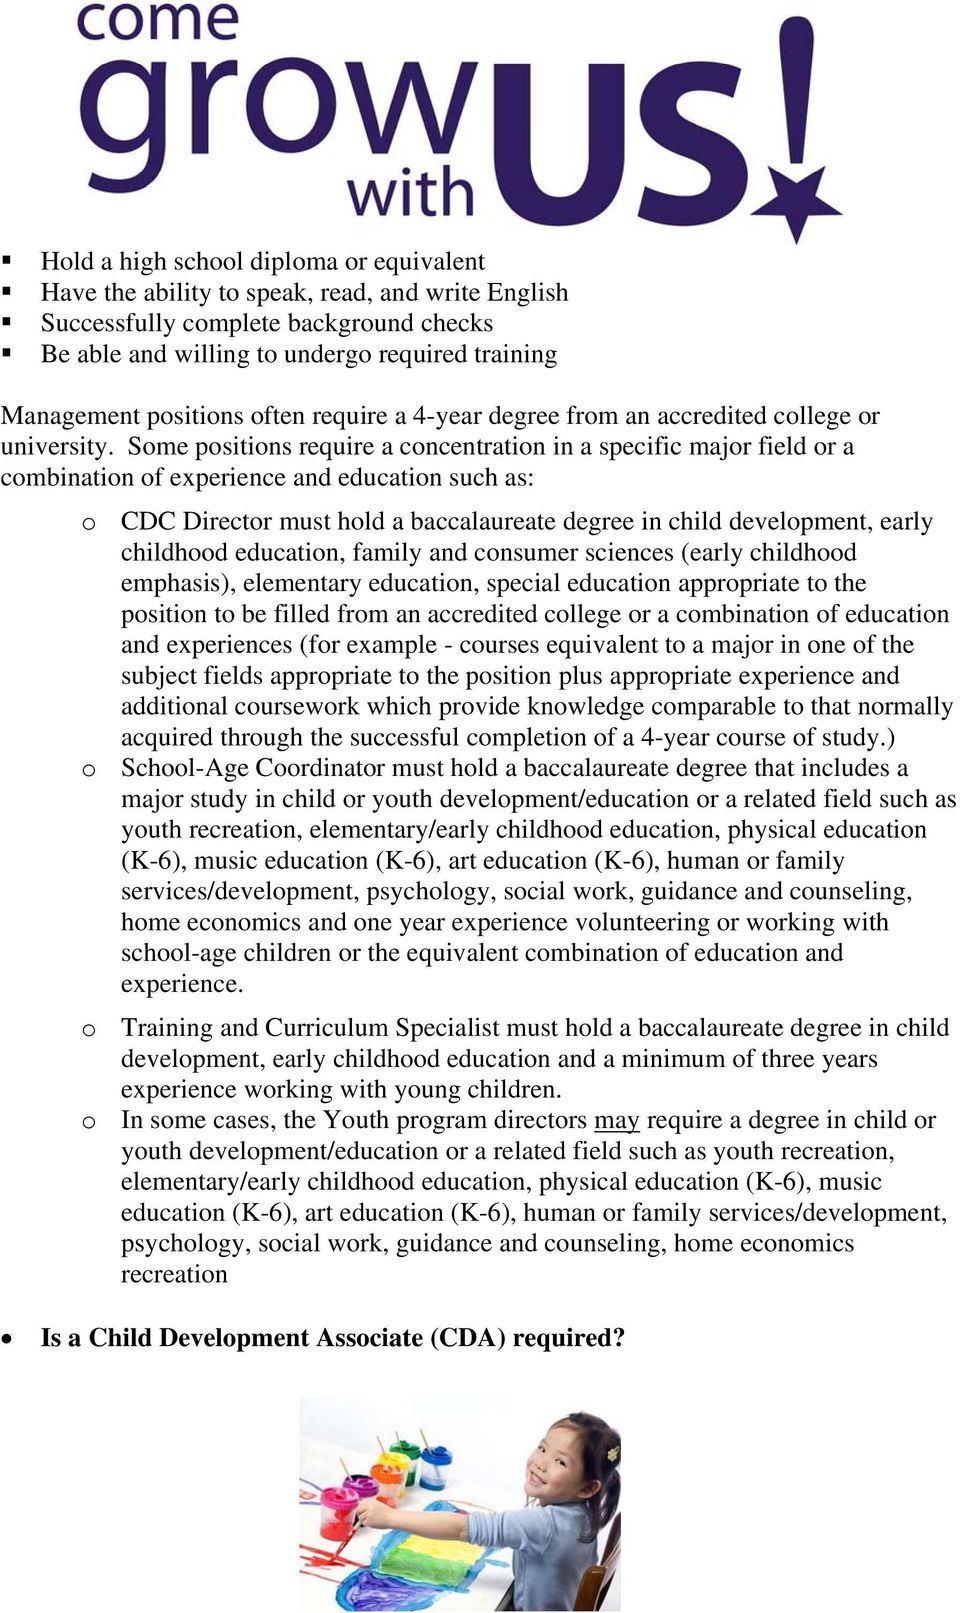 Some positions require a concentration in a specific major field or a combination of experience and education such as: o CDC Director must hold a baccalaureate degree in child development, early